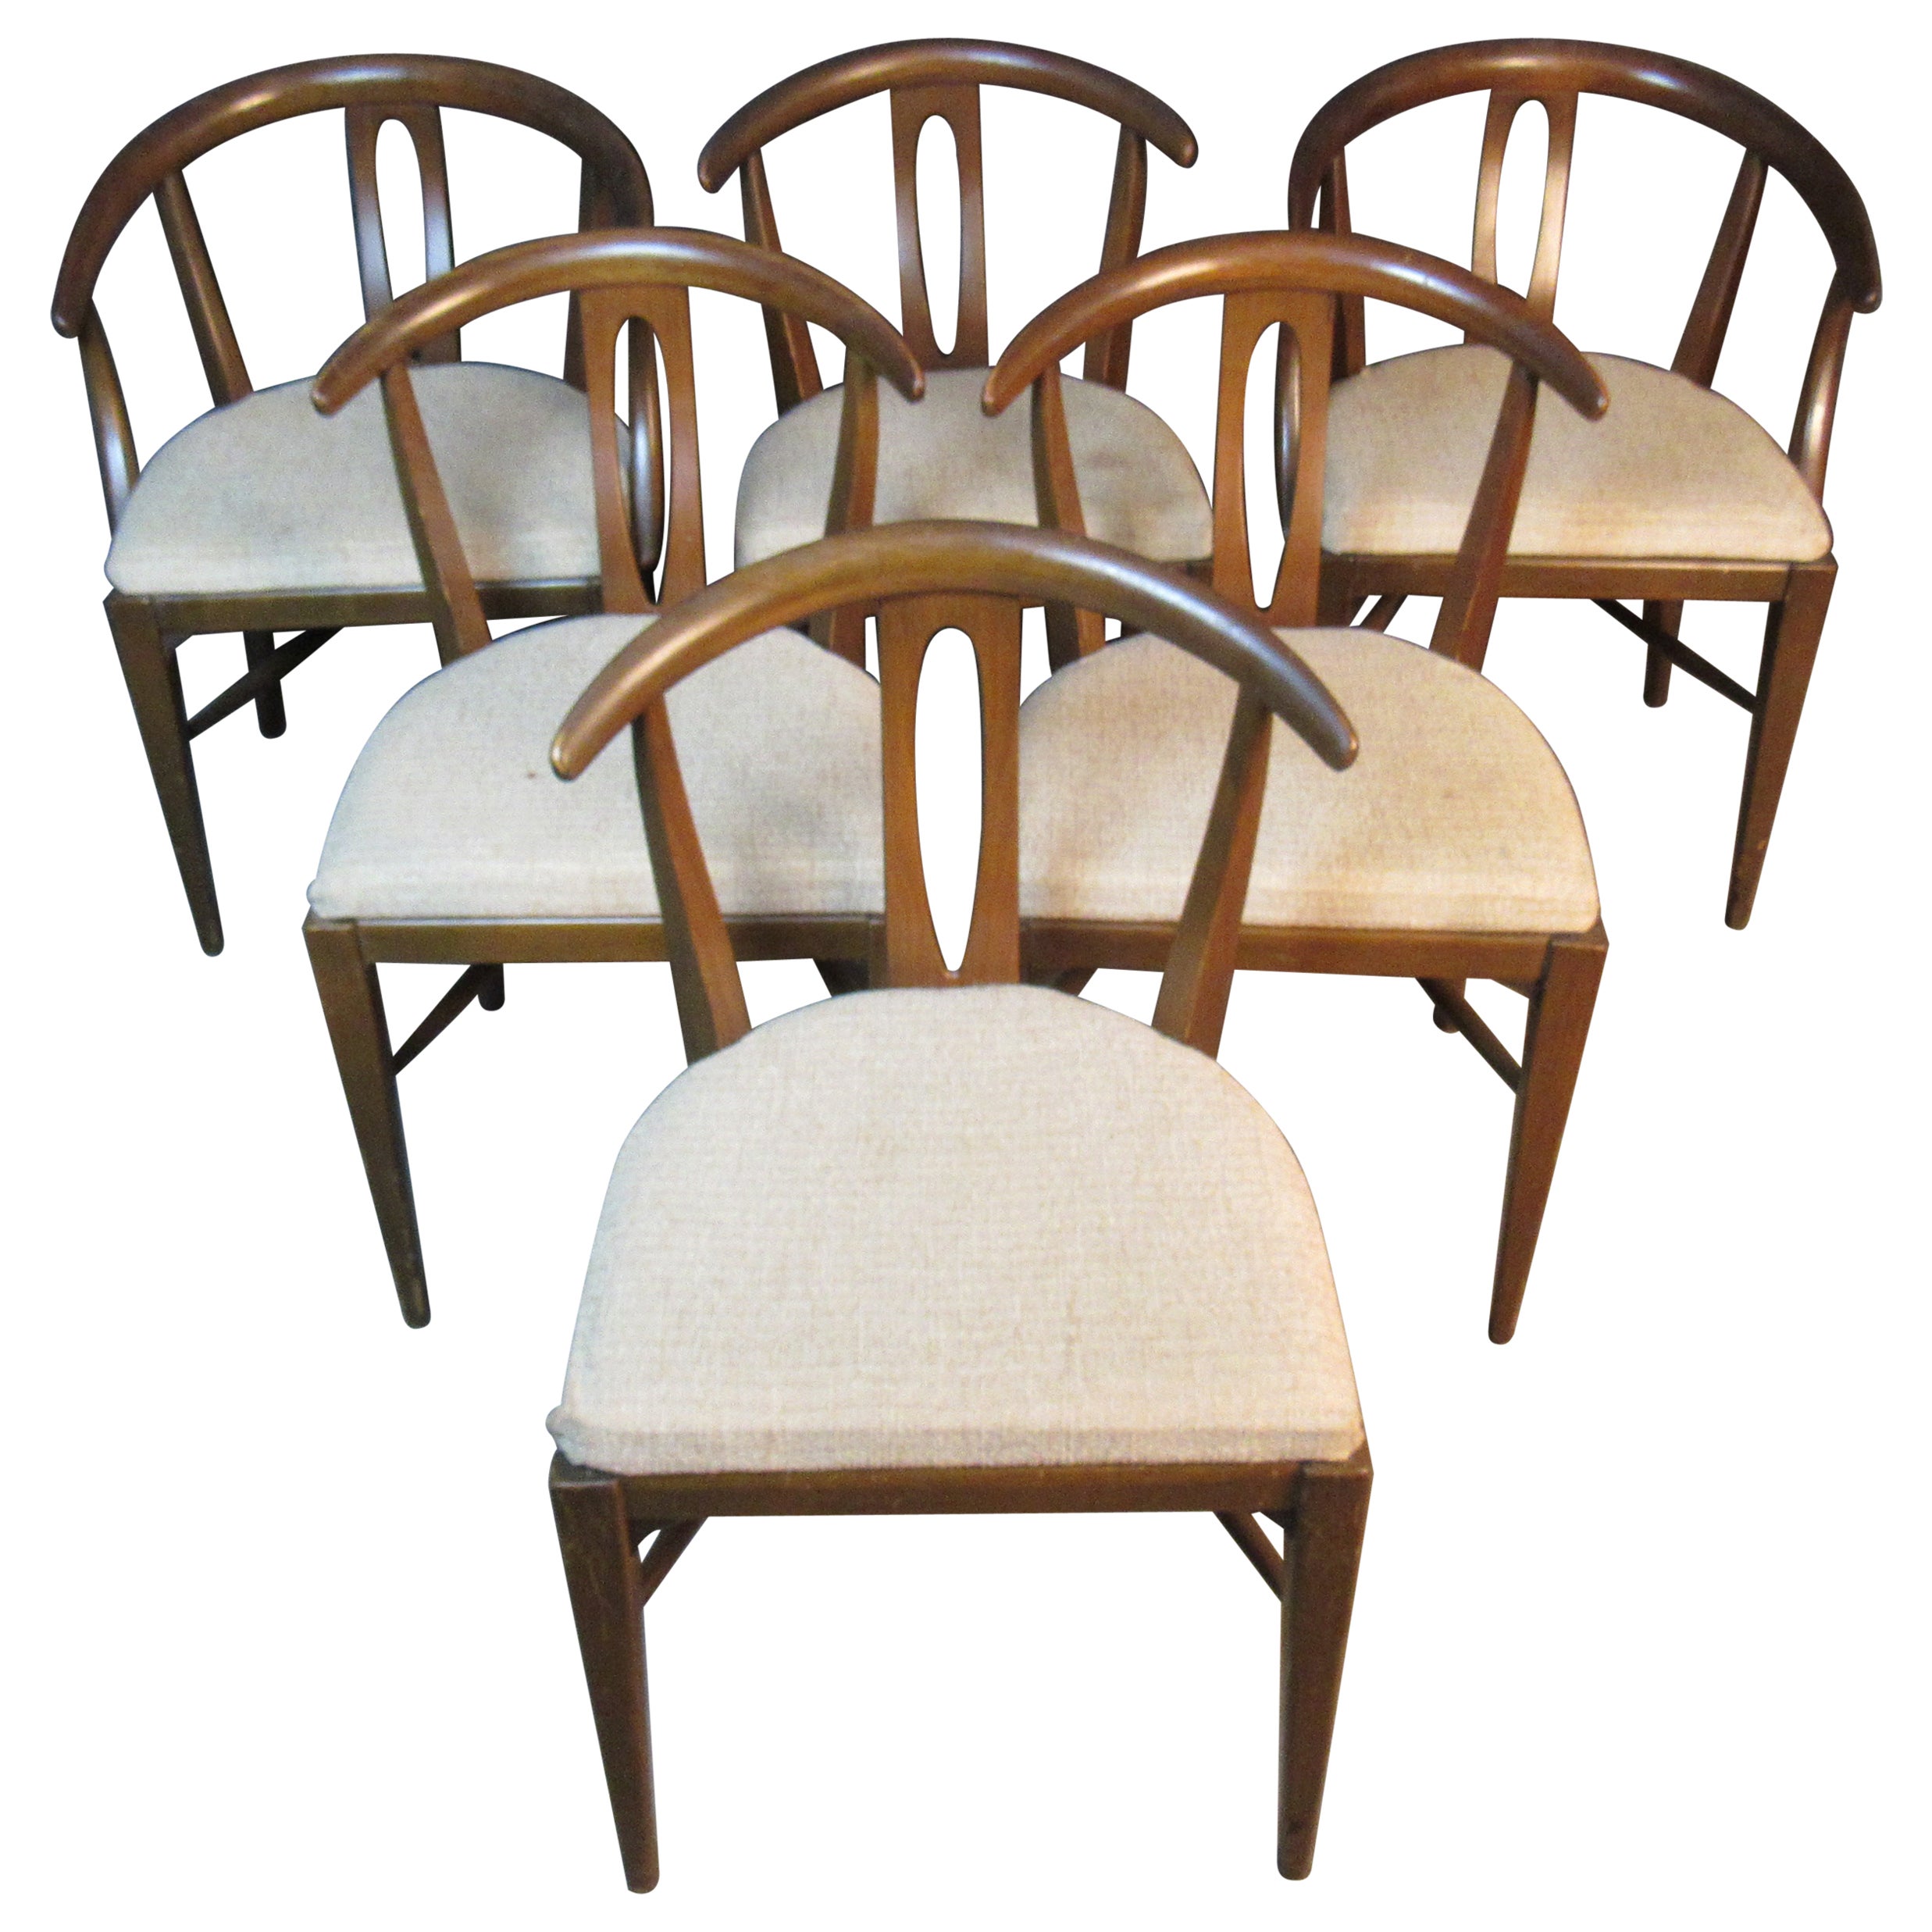 6 Vintage "Wishbone" Style Chairs by Blowing Rock Furniture